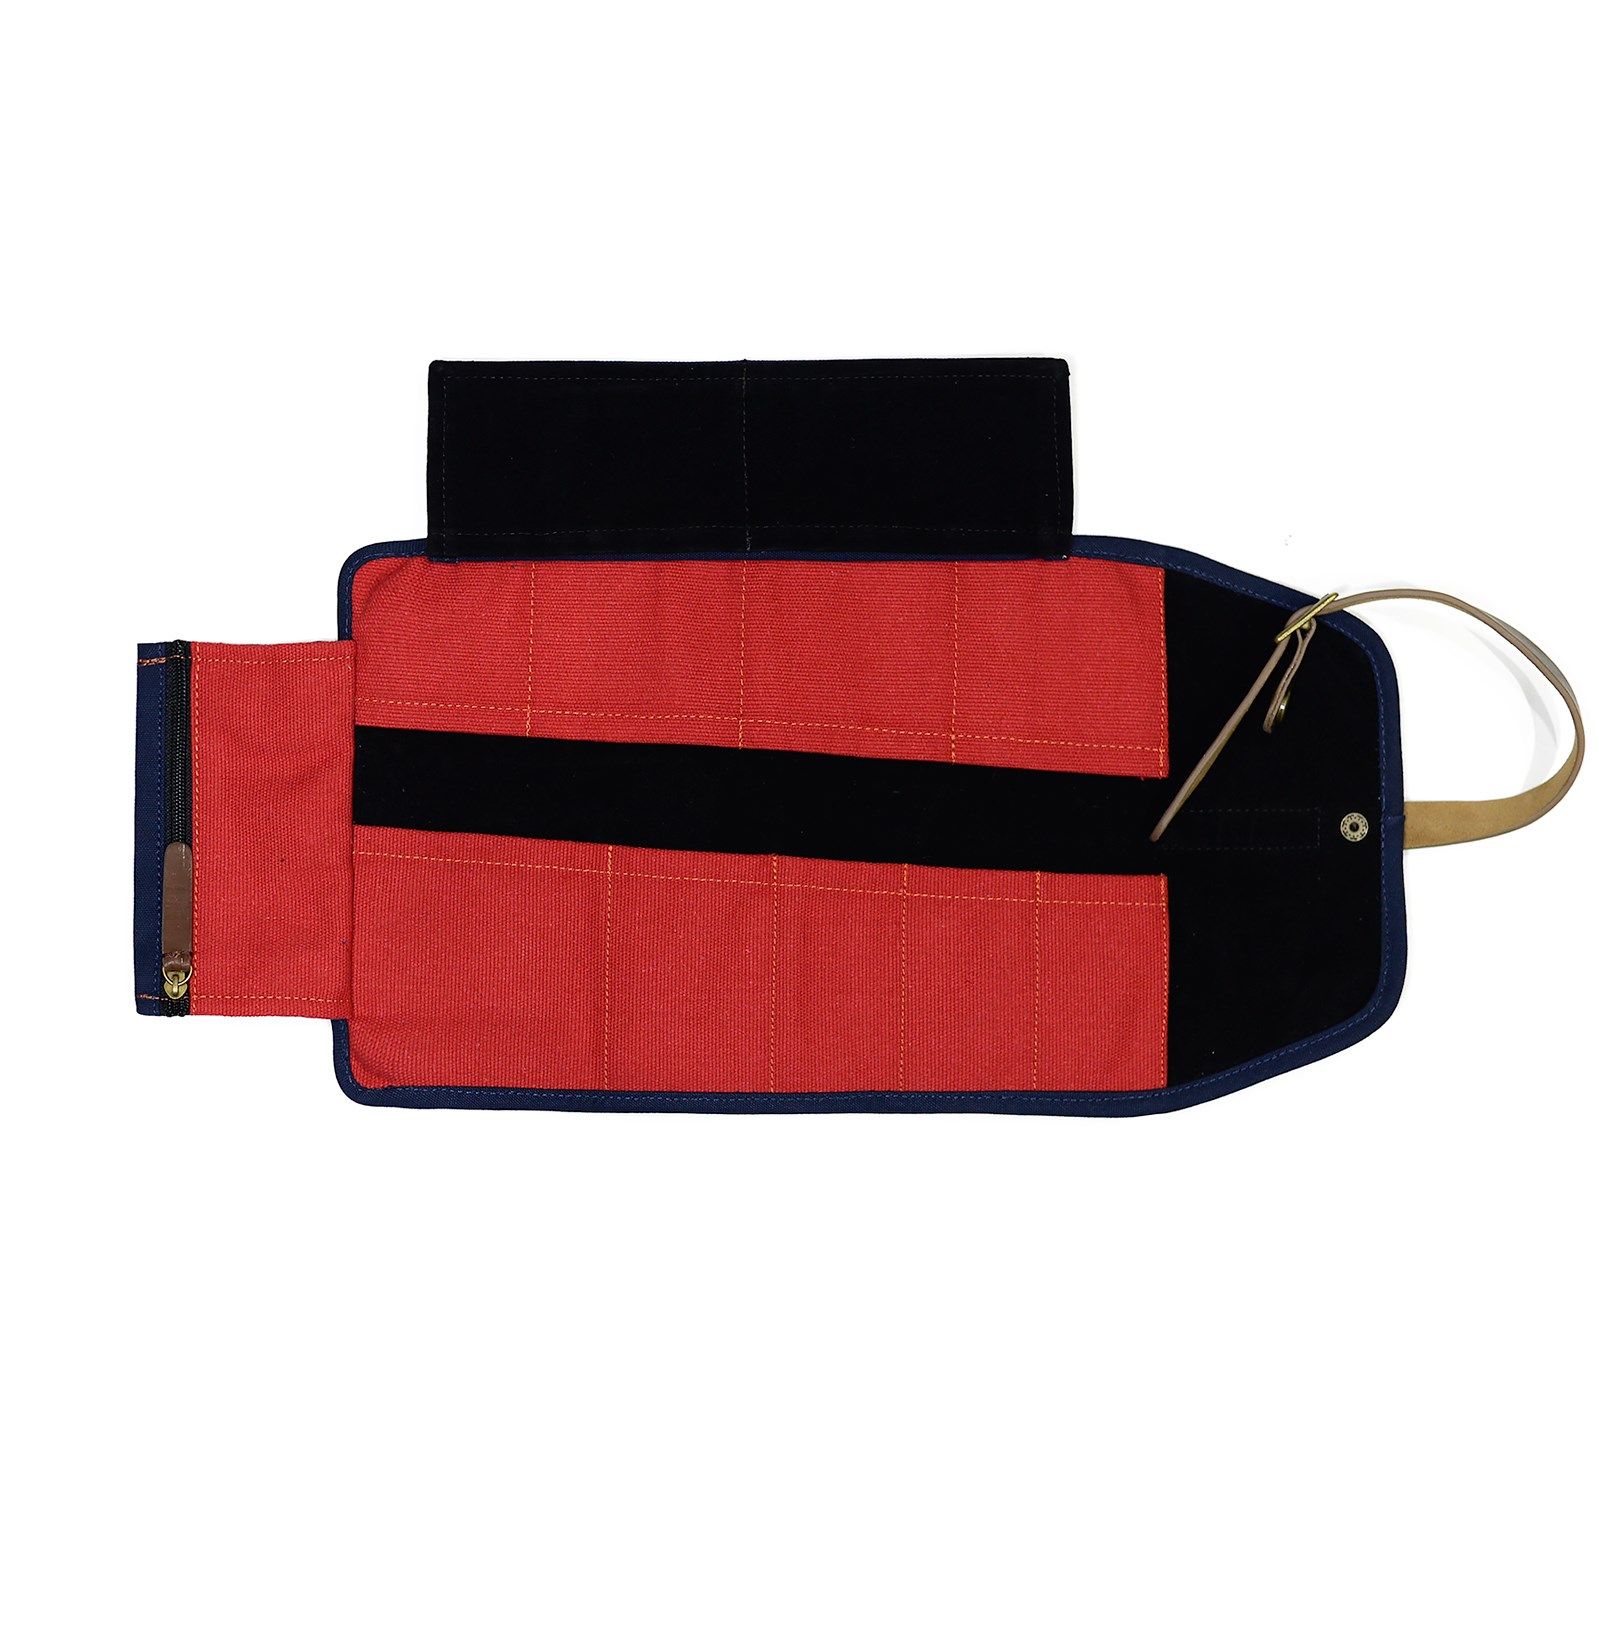 TOOL ROLL - NAVY/RED